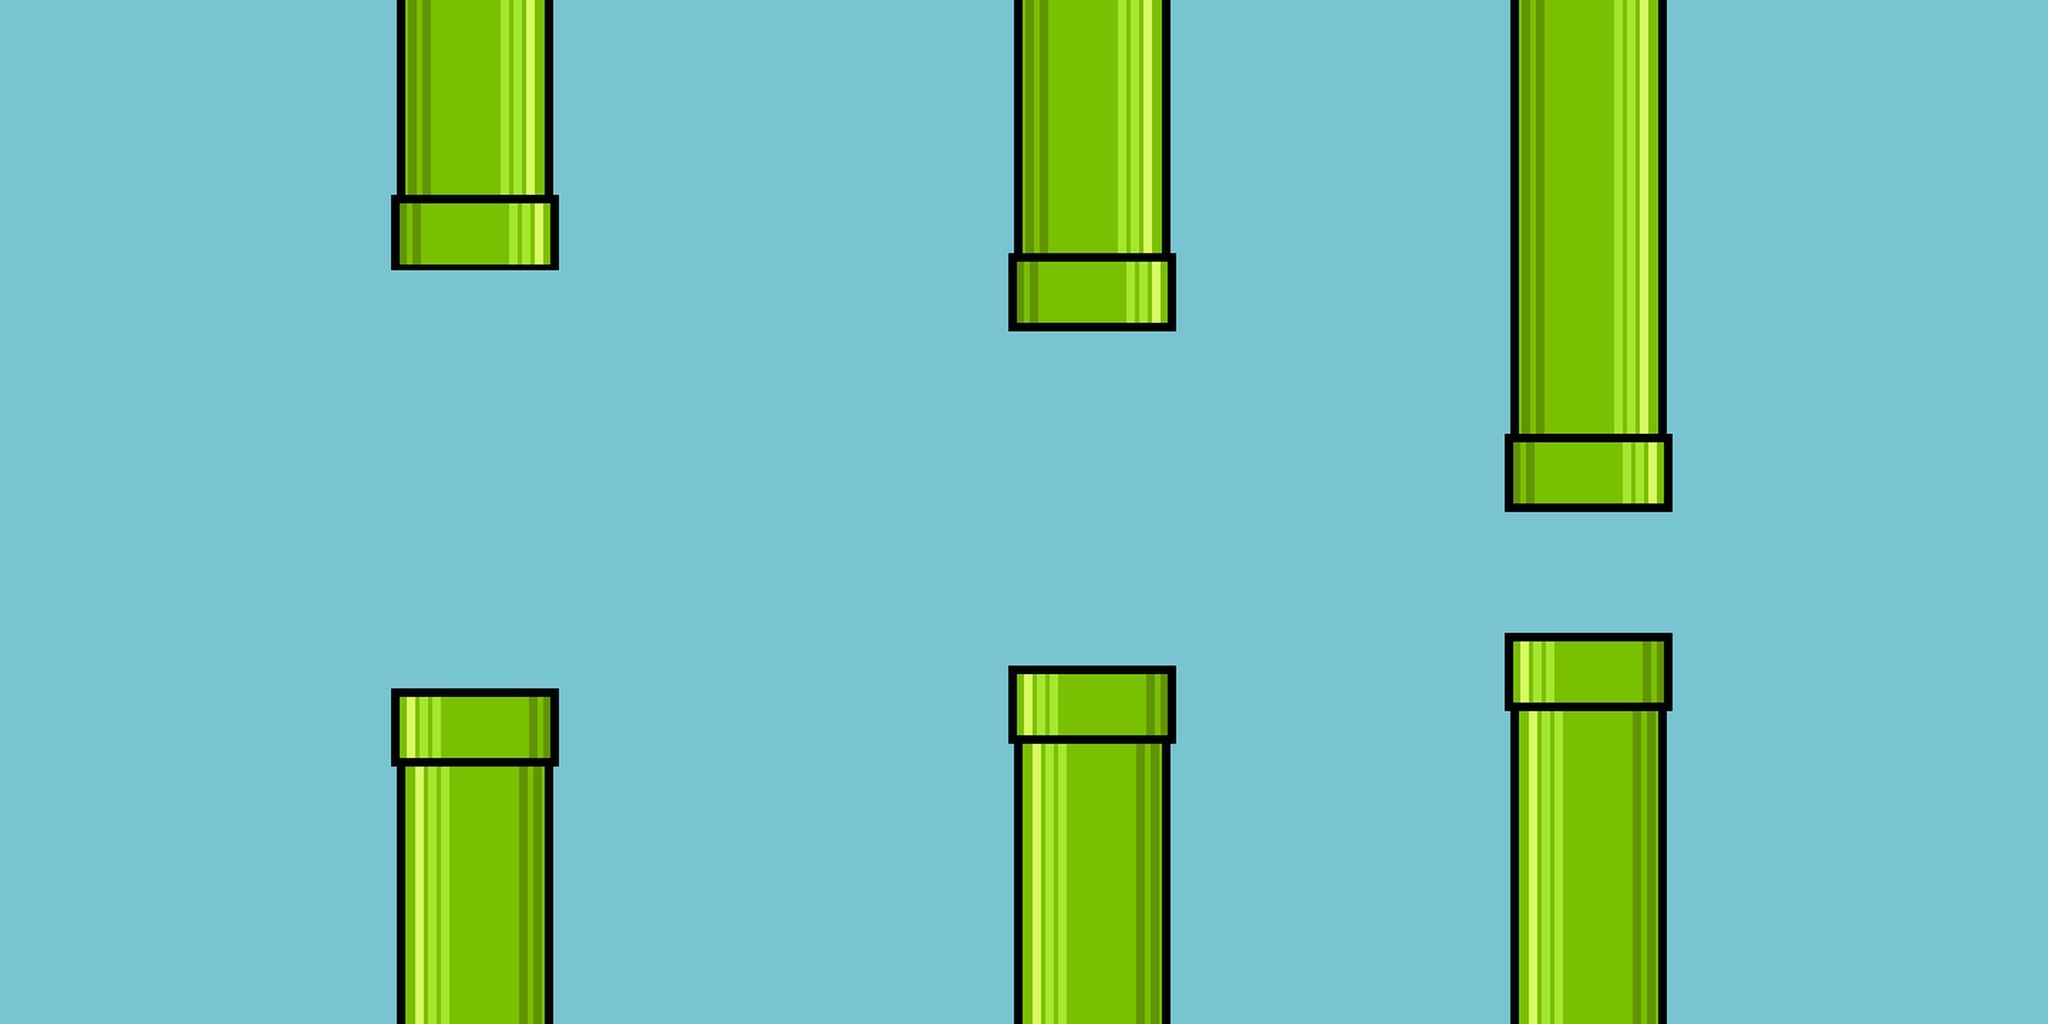 Flappy Bird is coming back, but not just yet. The Daily Dot